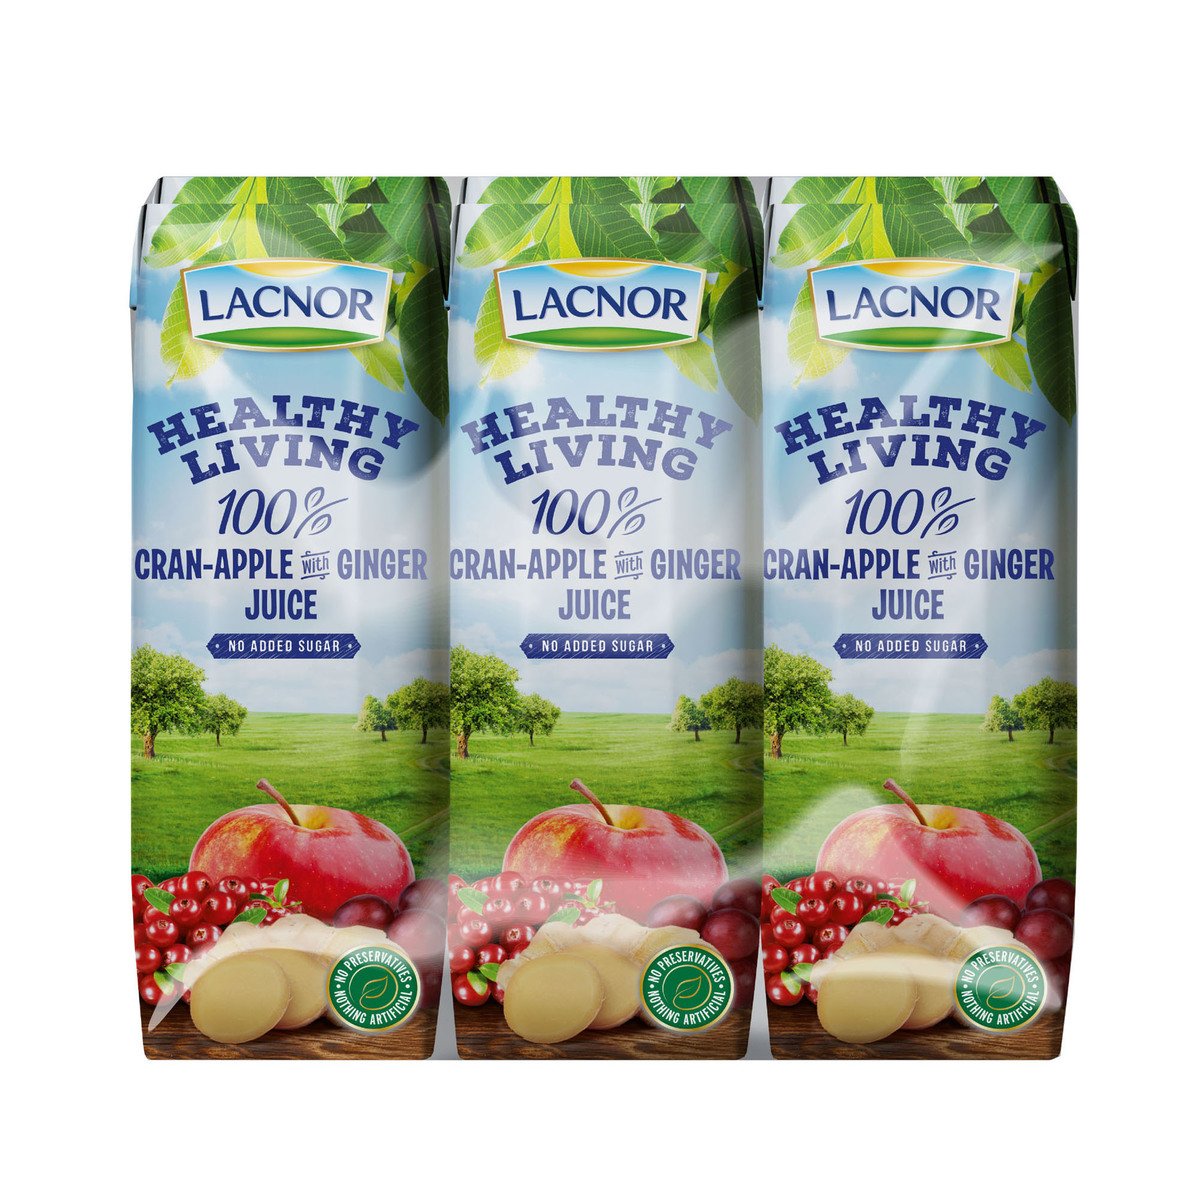 Lacnor Healthy Living Cran-Apple with Ginger Juice 250 ml